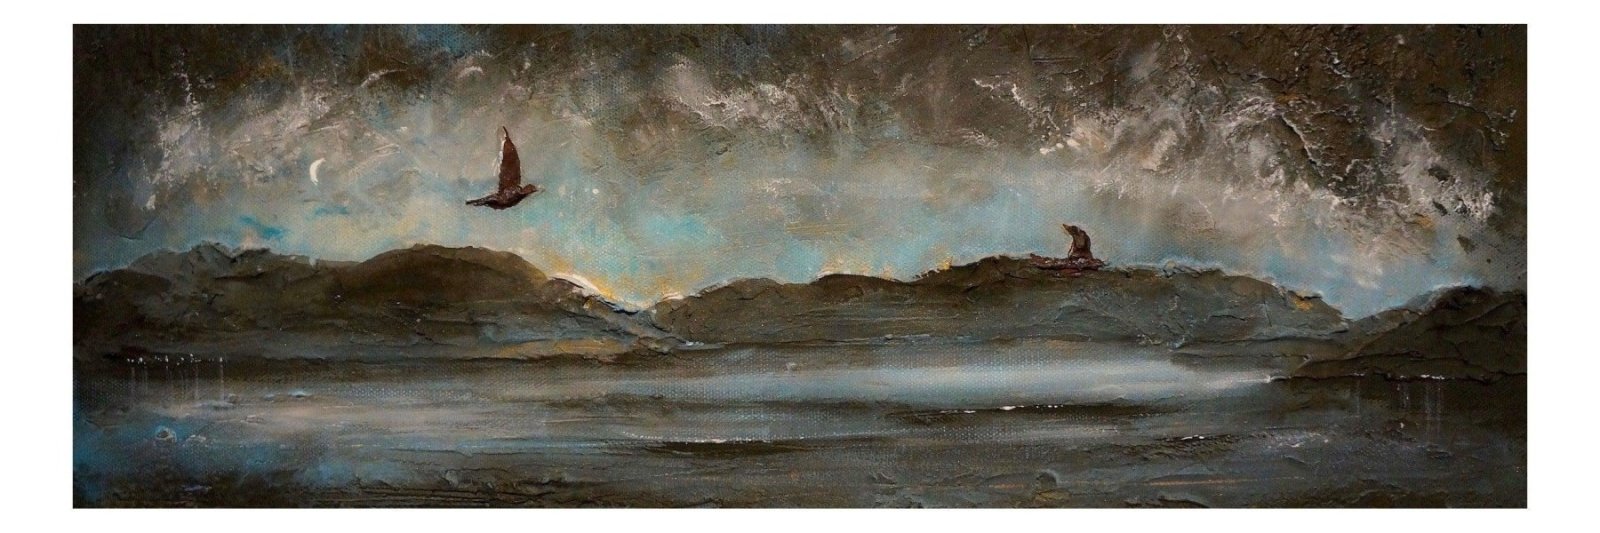 Clyde Storm Brewing-Panoramic Prints-River Clyde Art Gallery-Paintings, Prints, Homeware, Art Gifts From Scotland By Scottish Artist Kevin Hunter